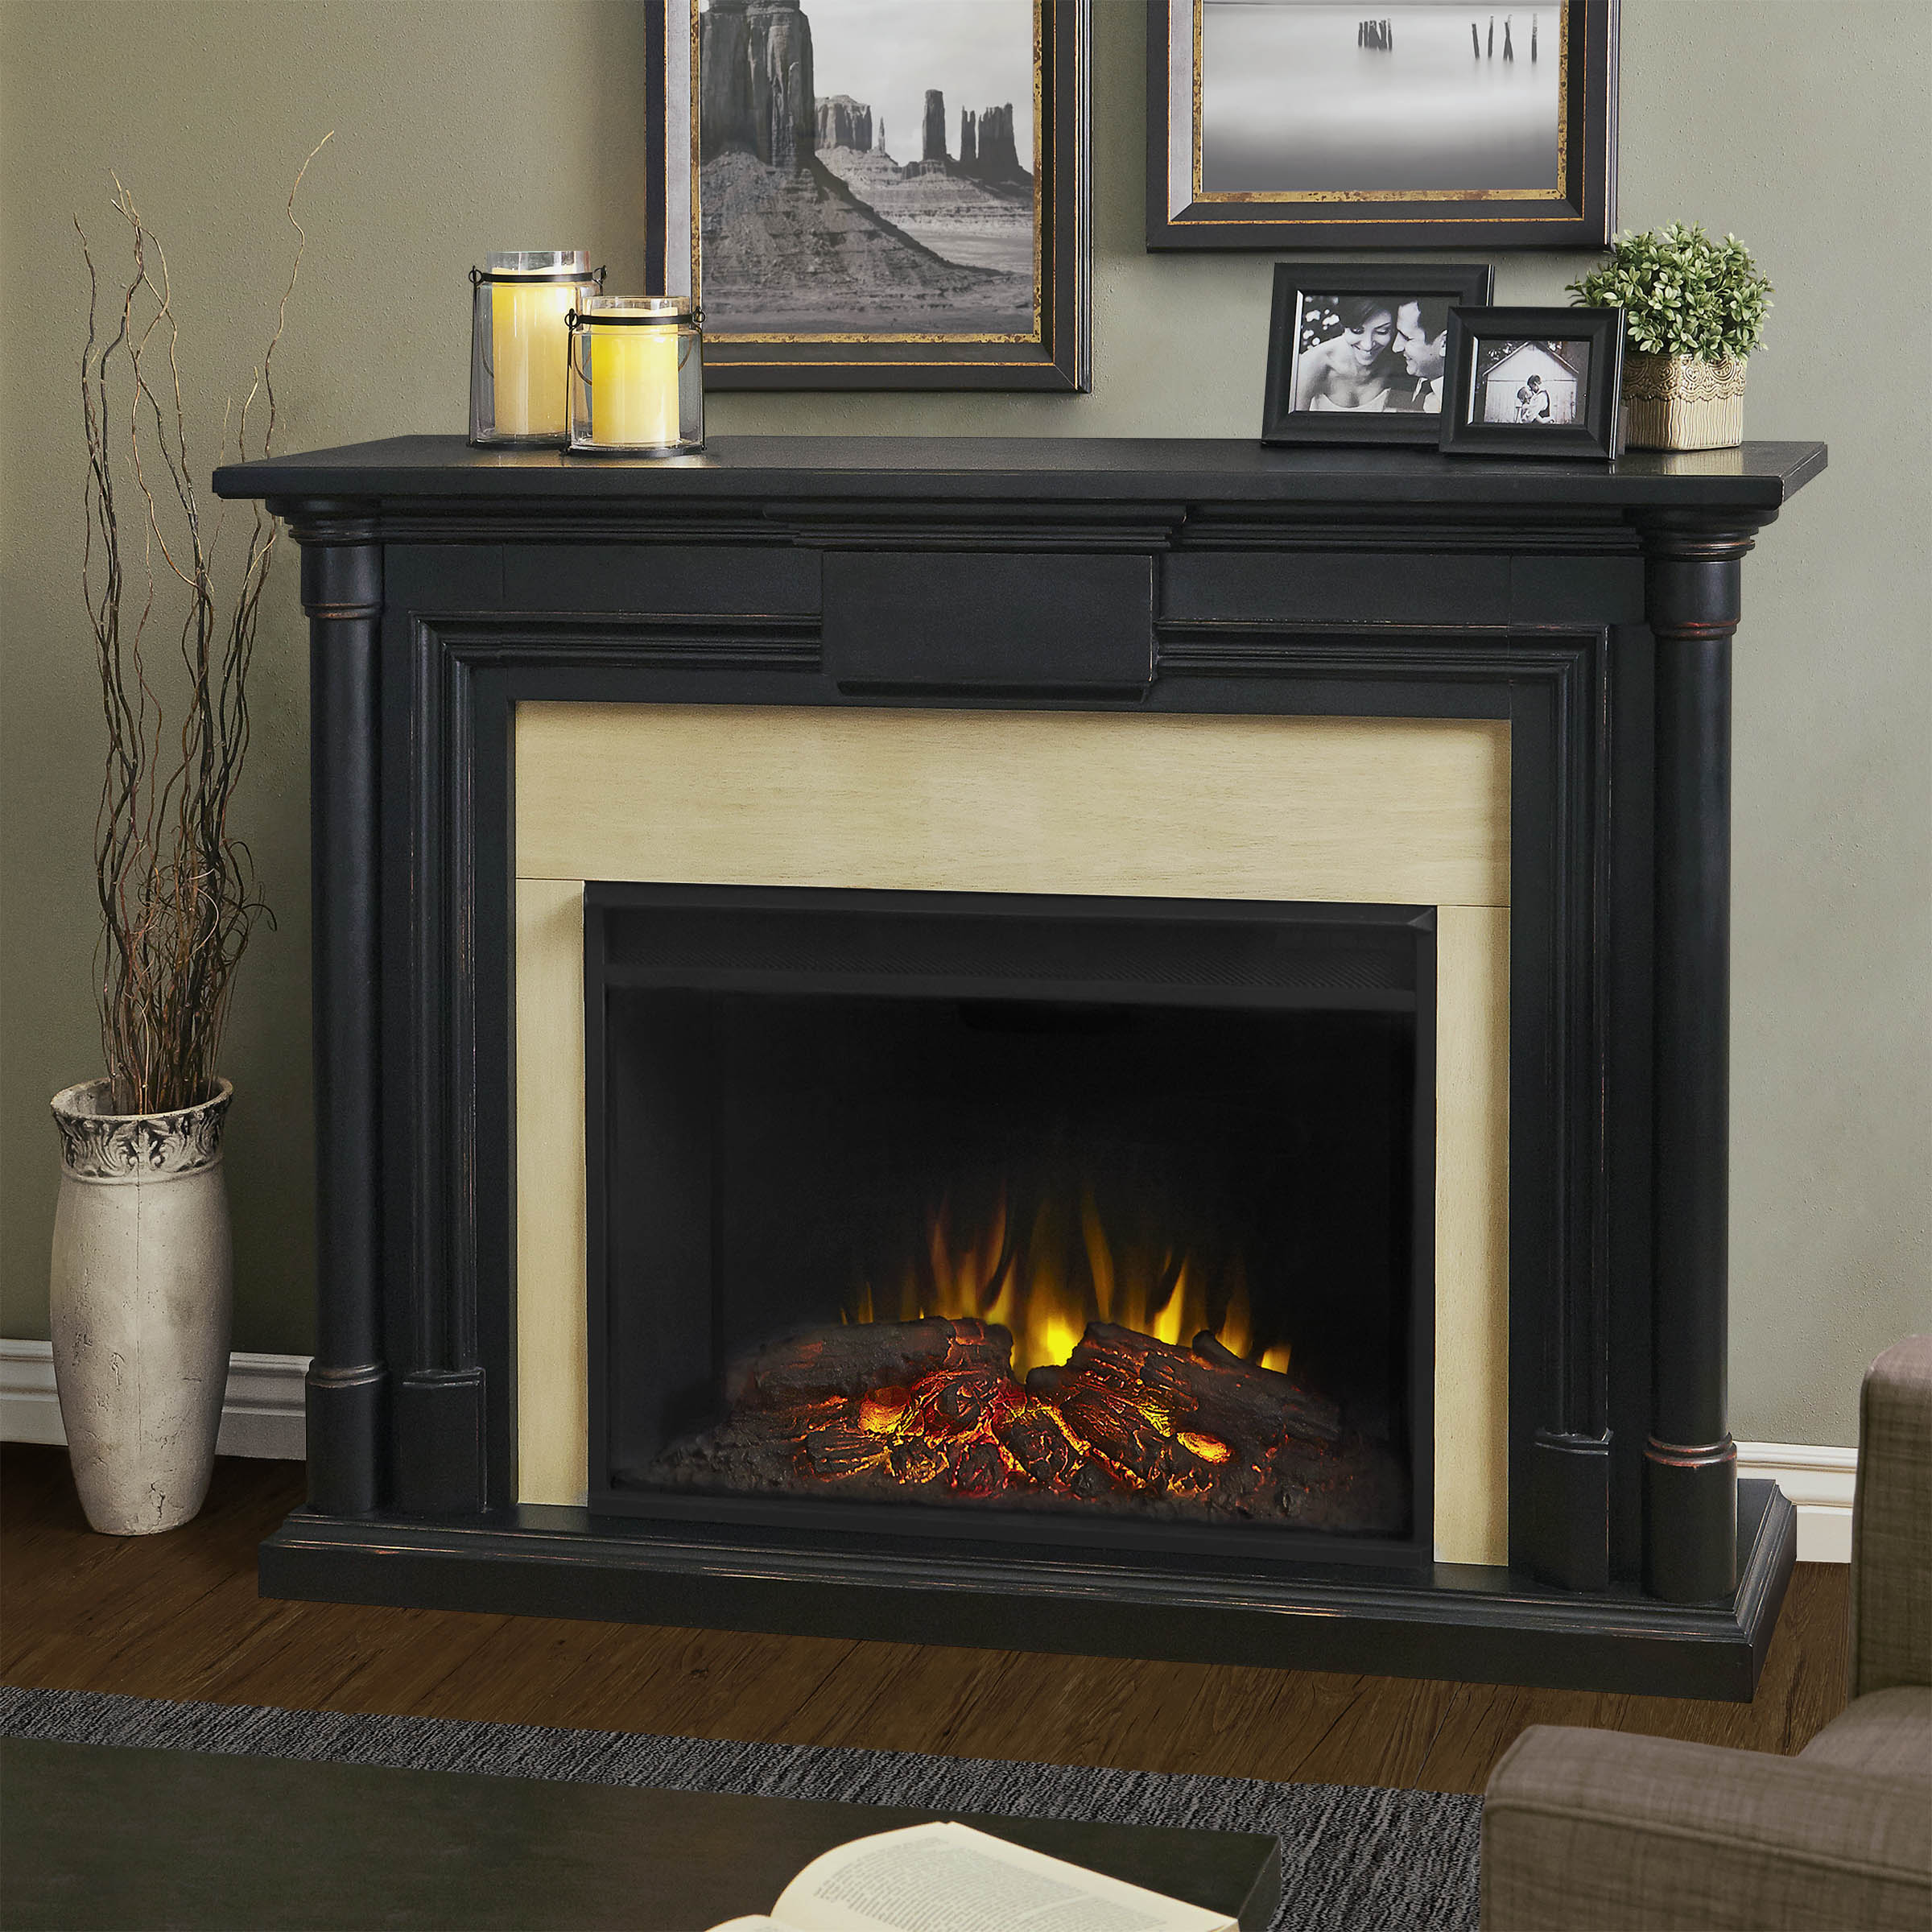 The Maxwell represents a new generation of Real Flame electric fireplaces. The 40" (diagonal) Grand Series firebox is 30% larger than our standard firebox